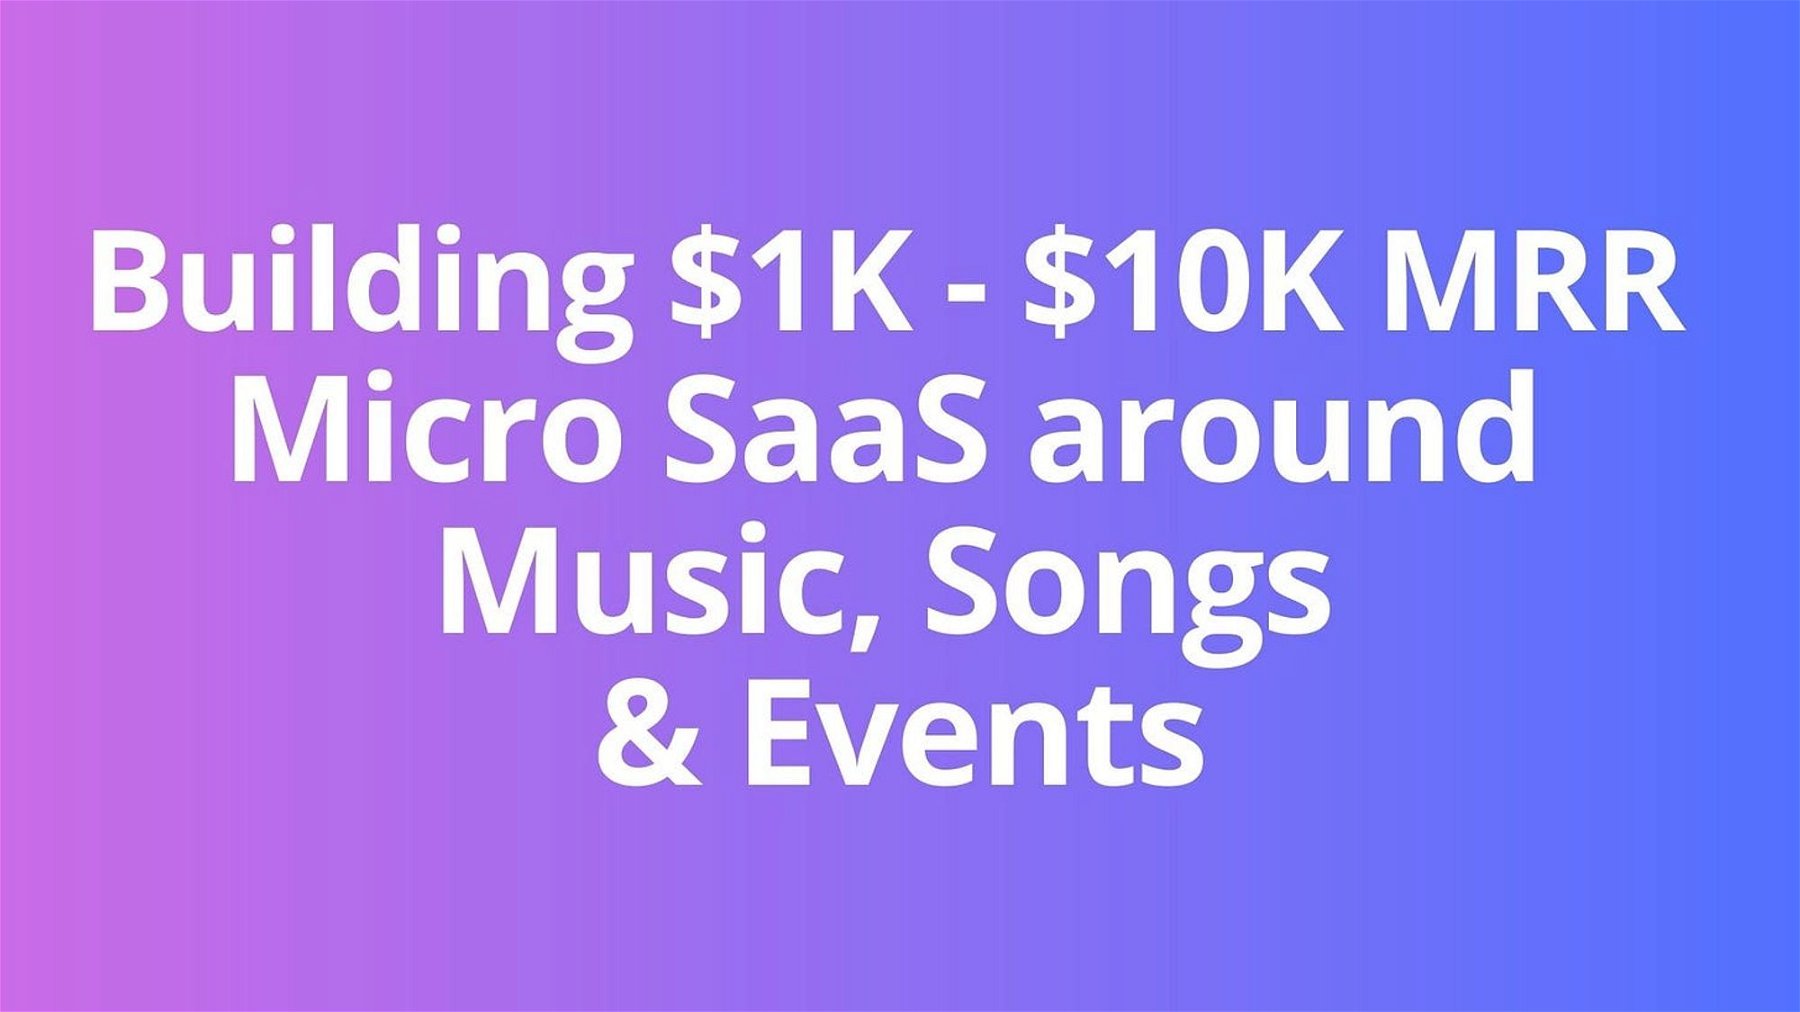 3 Ideas for Building Micro-SaaS around Music, Songs & Events   